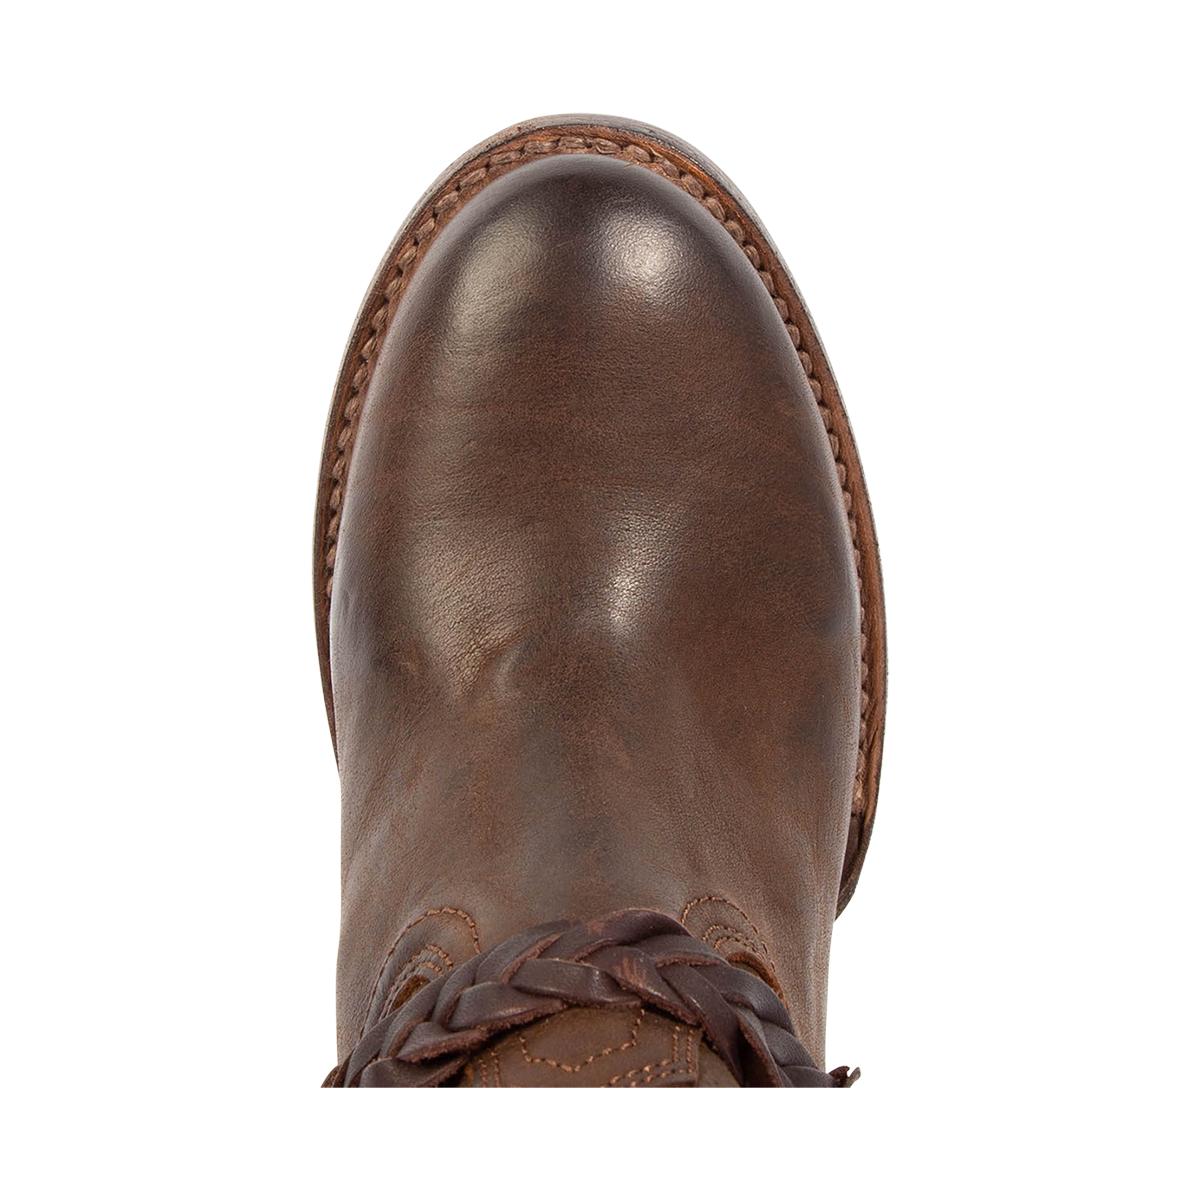 Top view showing round toe construction on FREEBIRD women's Clover brown leather boot